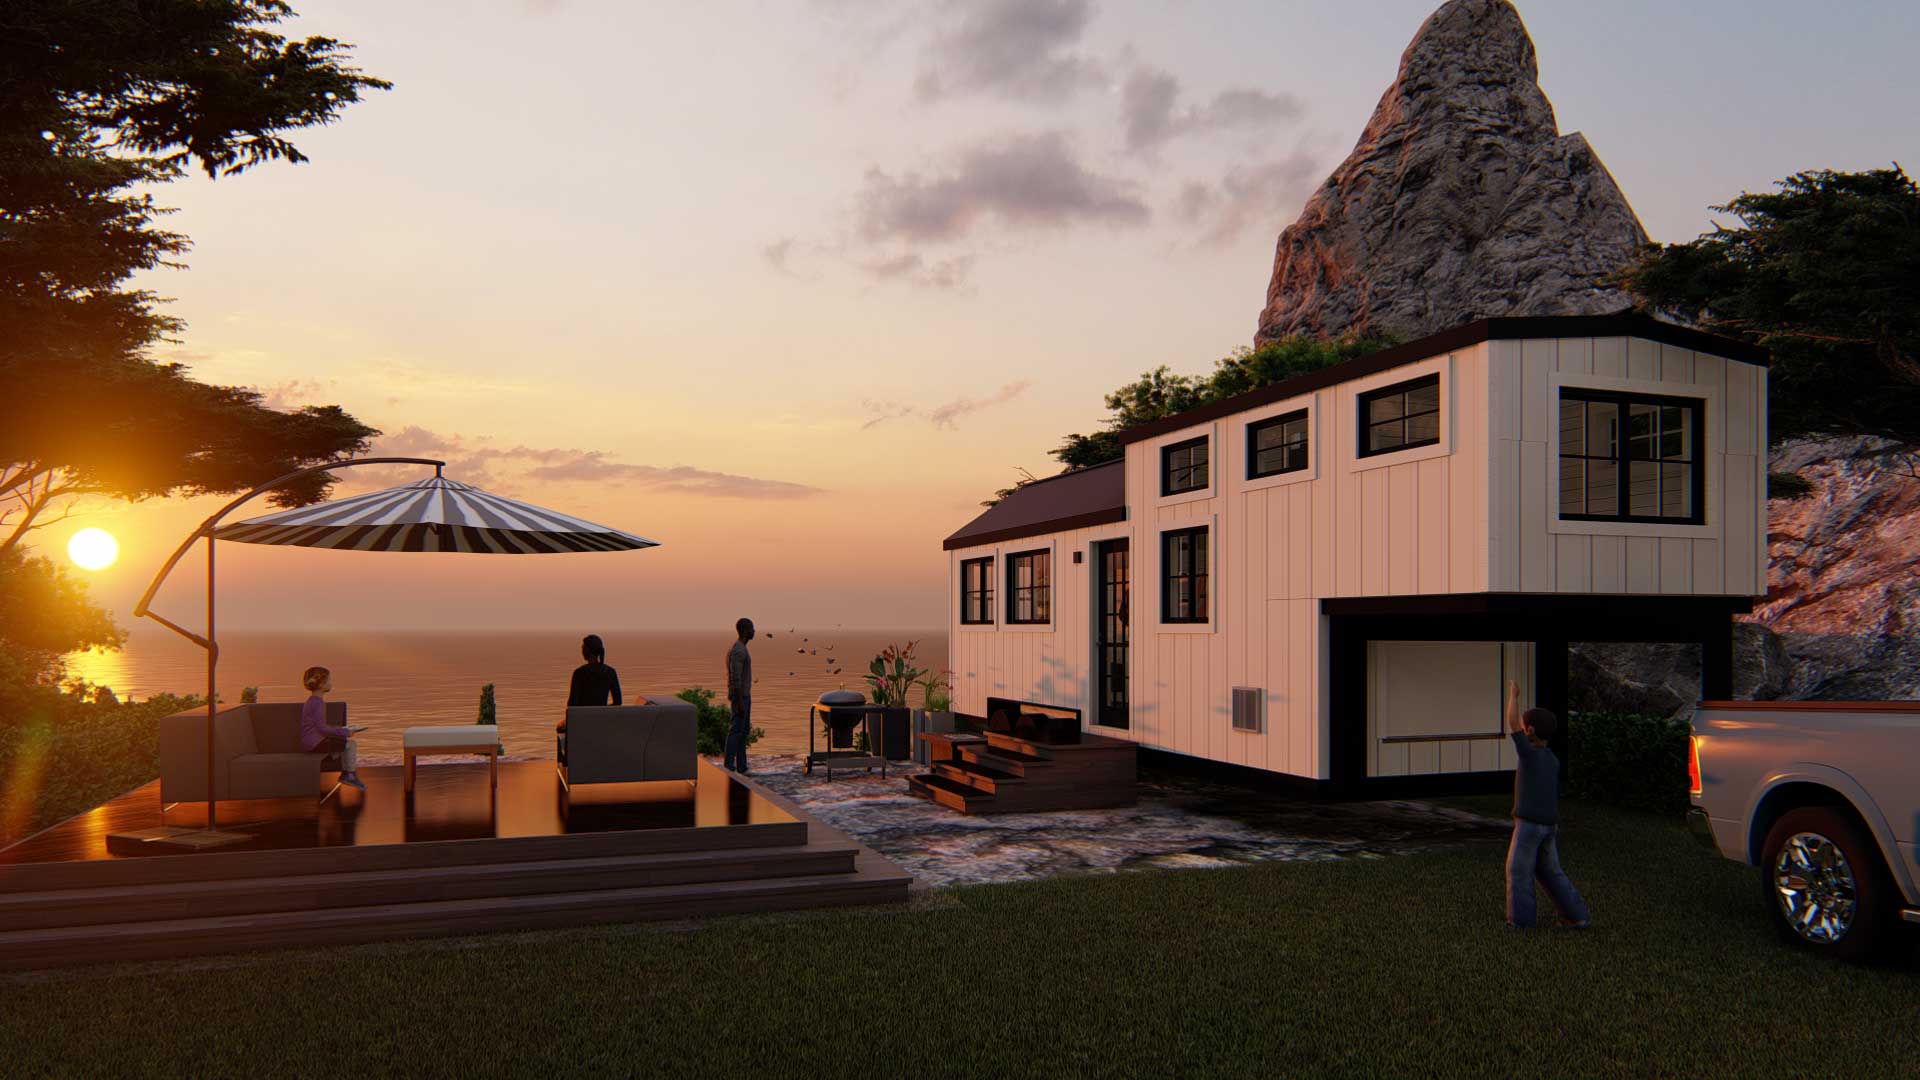 A Majesty tiny home overlooking a sunset over the ocean. 3d model.